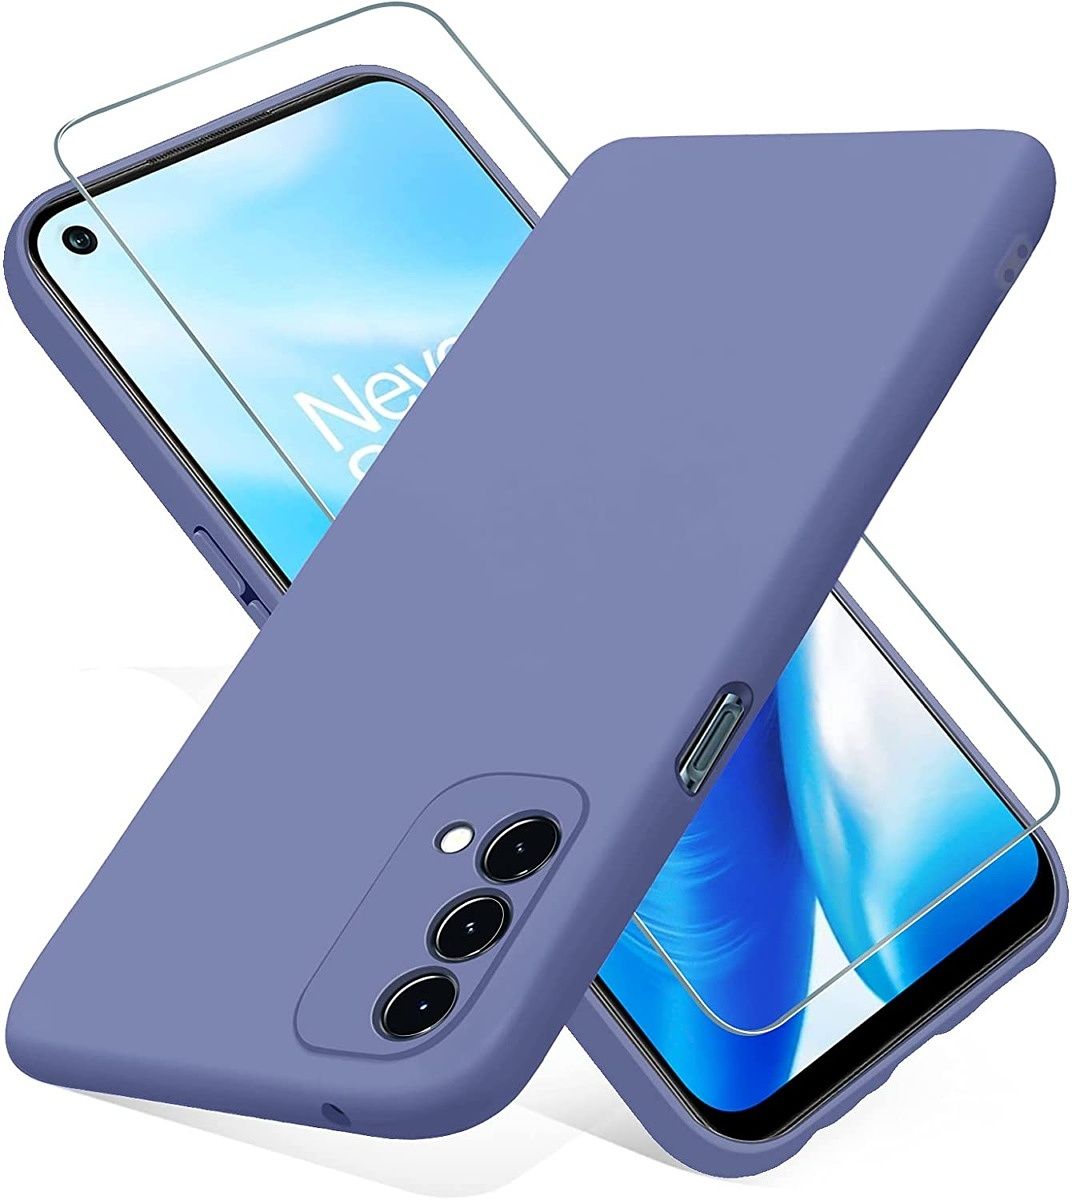 This soft silicone case for the OnePlus Nord N200 comes in two eye-catching colors: Taro Purple and Green.The smooth back is fingerprint resistant while the bundled screen guard protects the display from scratches and smudges.